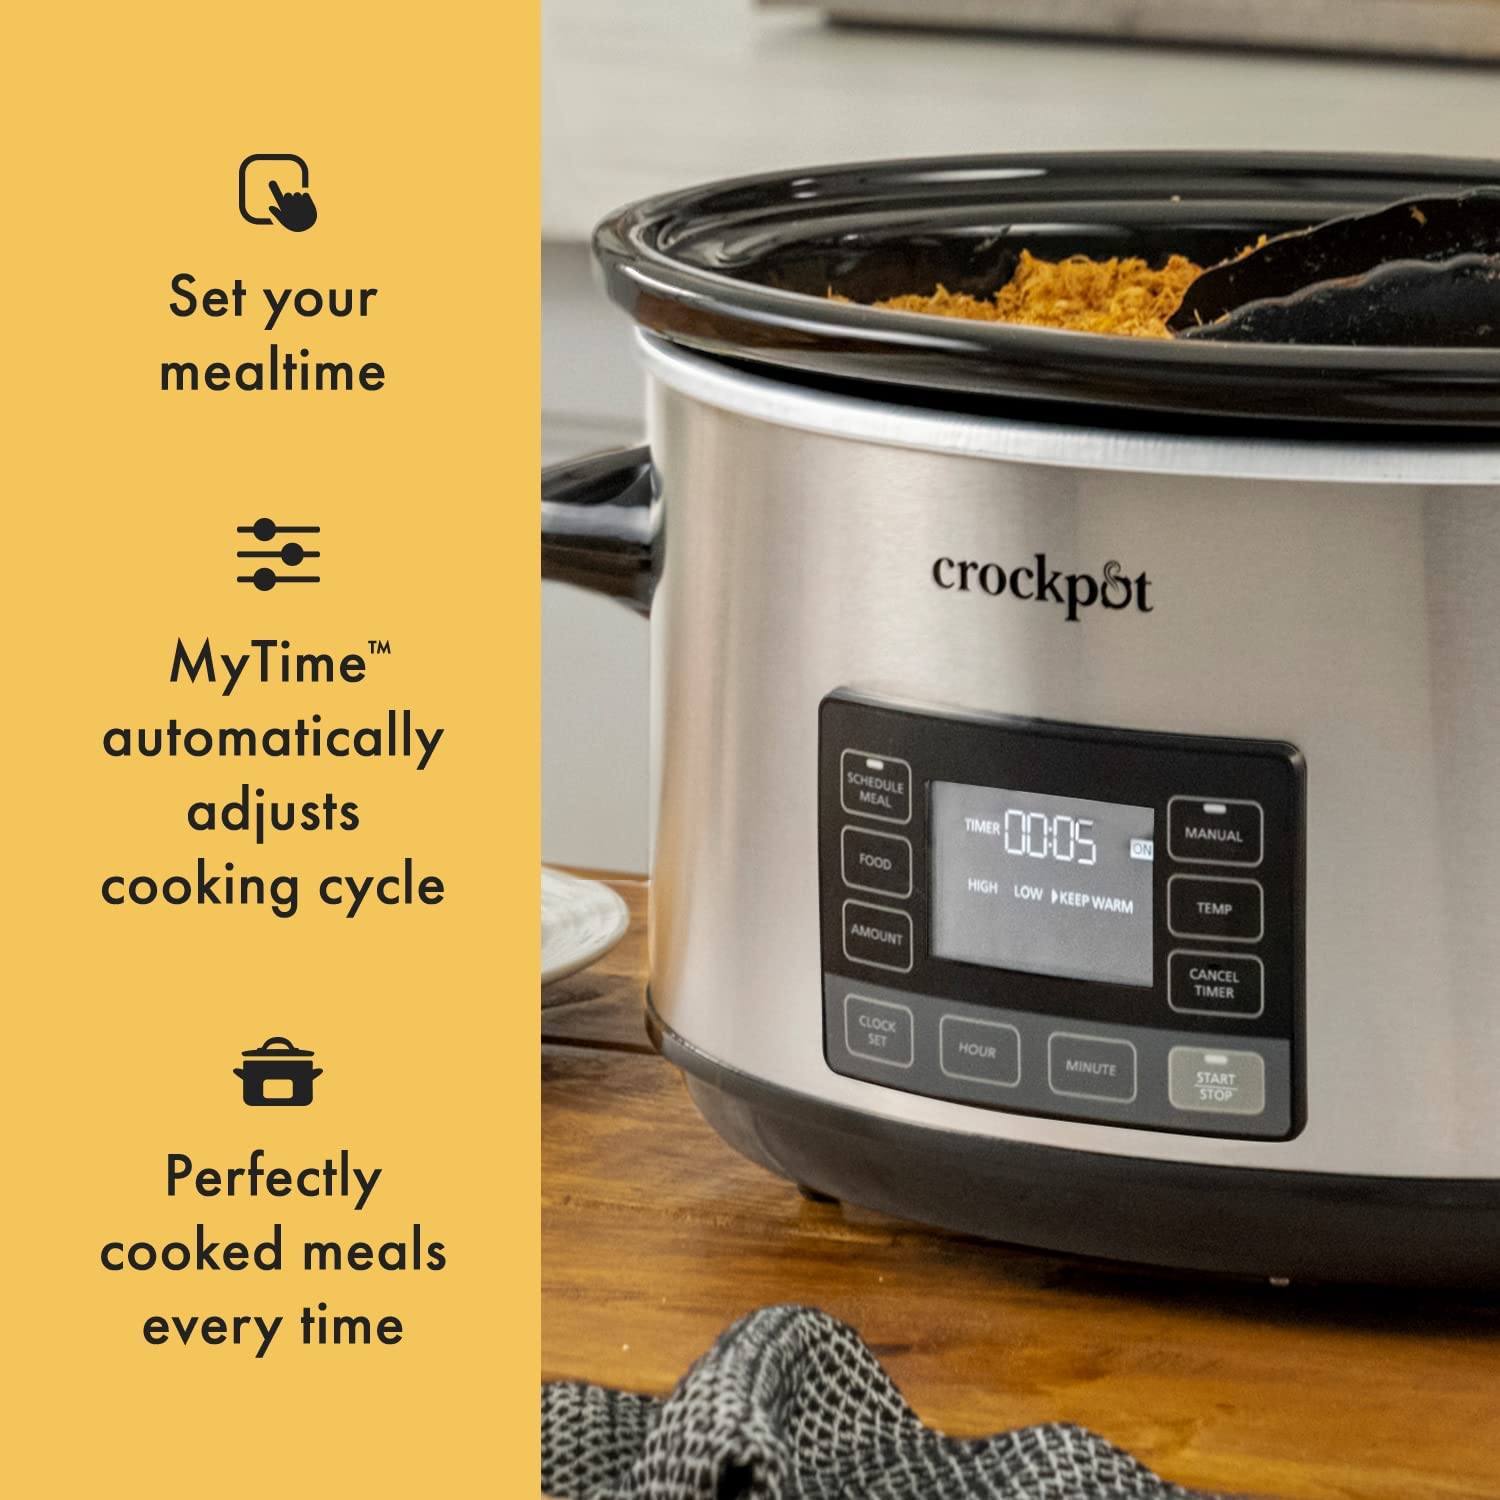 https://bigbigmart.com/wp-content/uploads/2023/03/Crockpot-Portable-7-Quart-Slow-Cooker-with-Locking-Lid-and-Auto-Adjust-Cook-Time-Technology-Stainless-Steel33.jpg